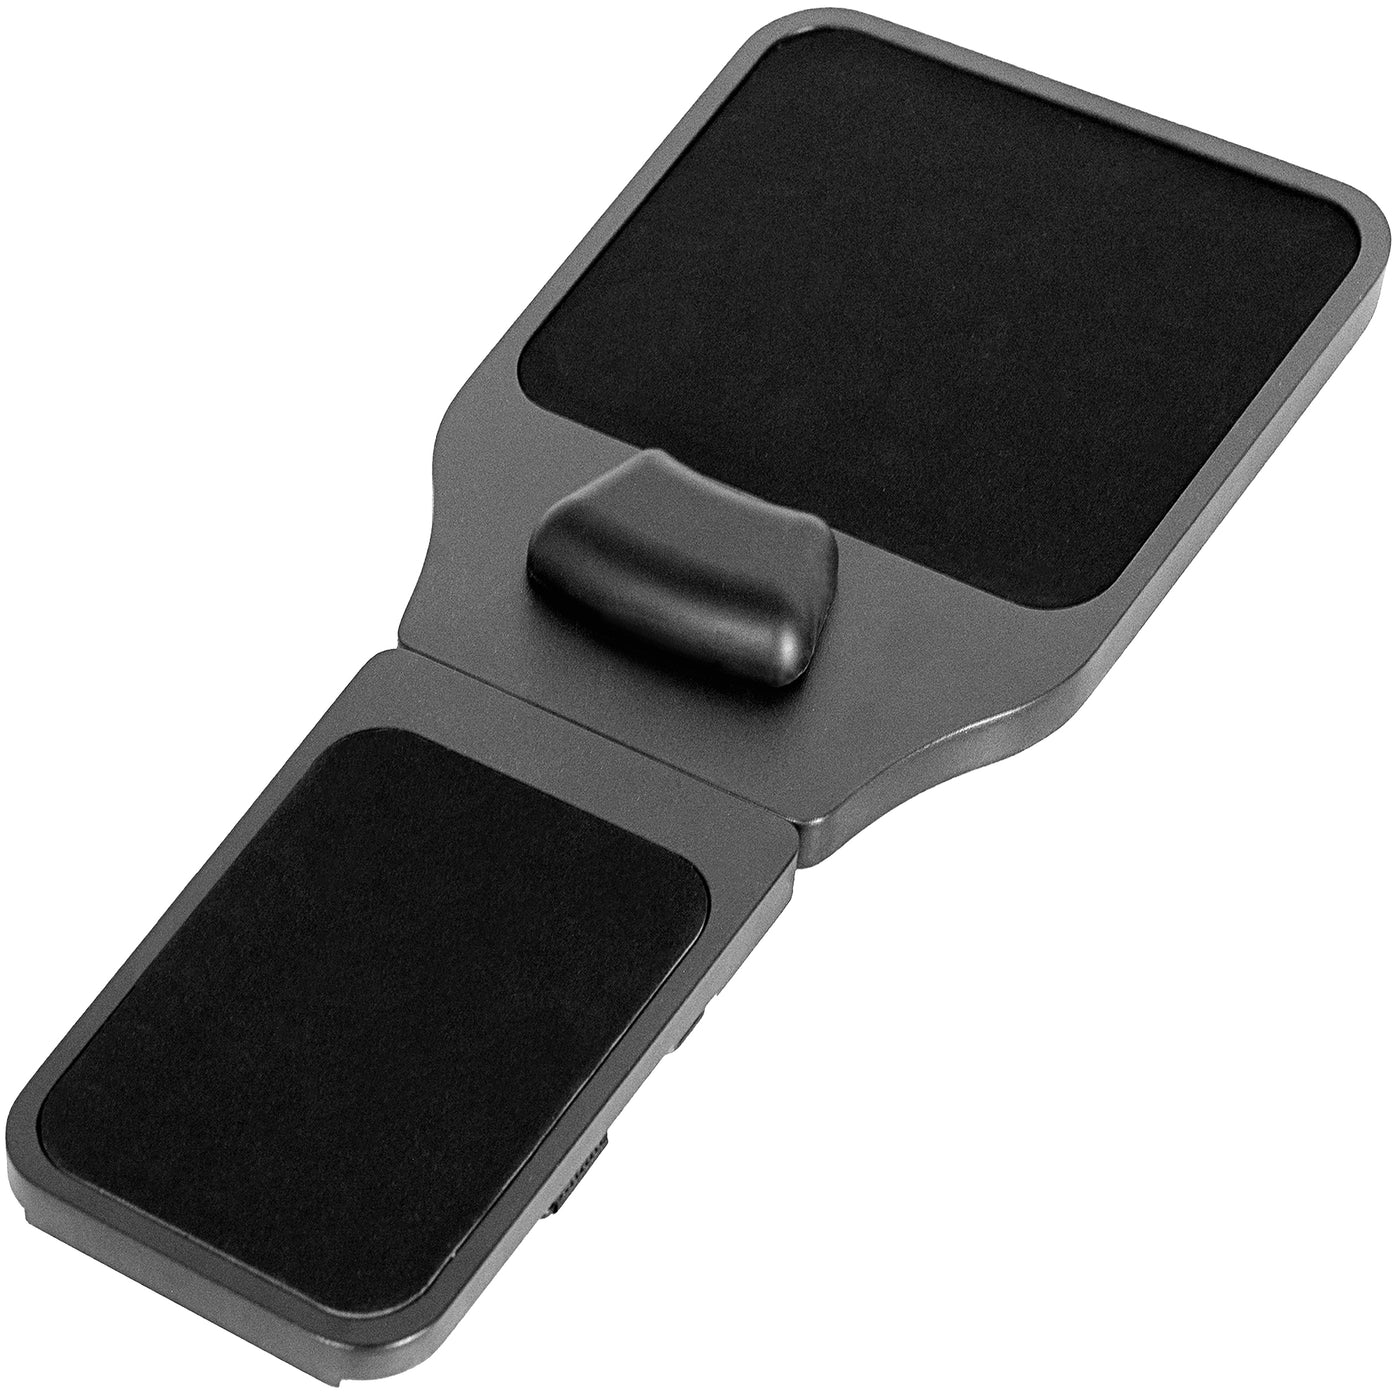 Strap on chair armrest with mouse pad.